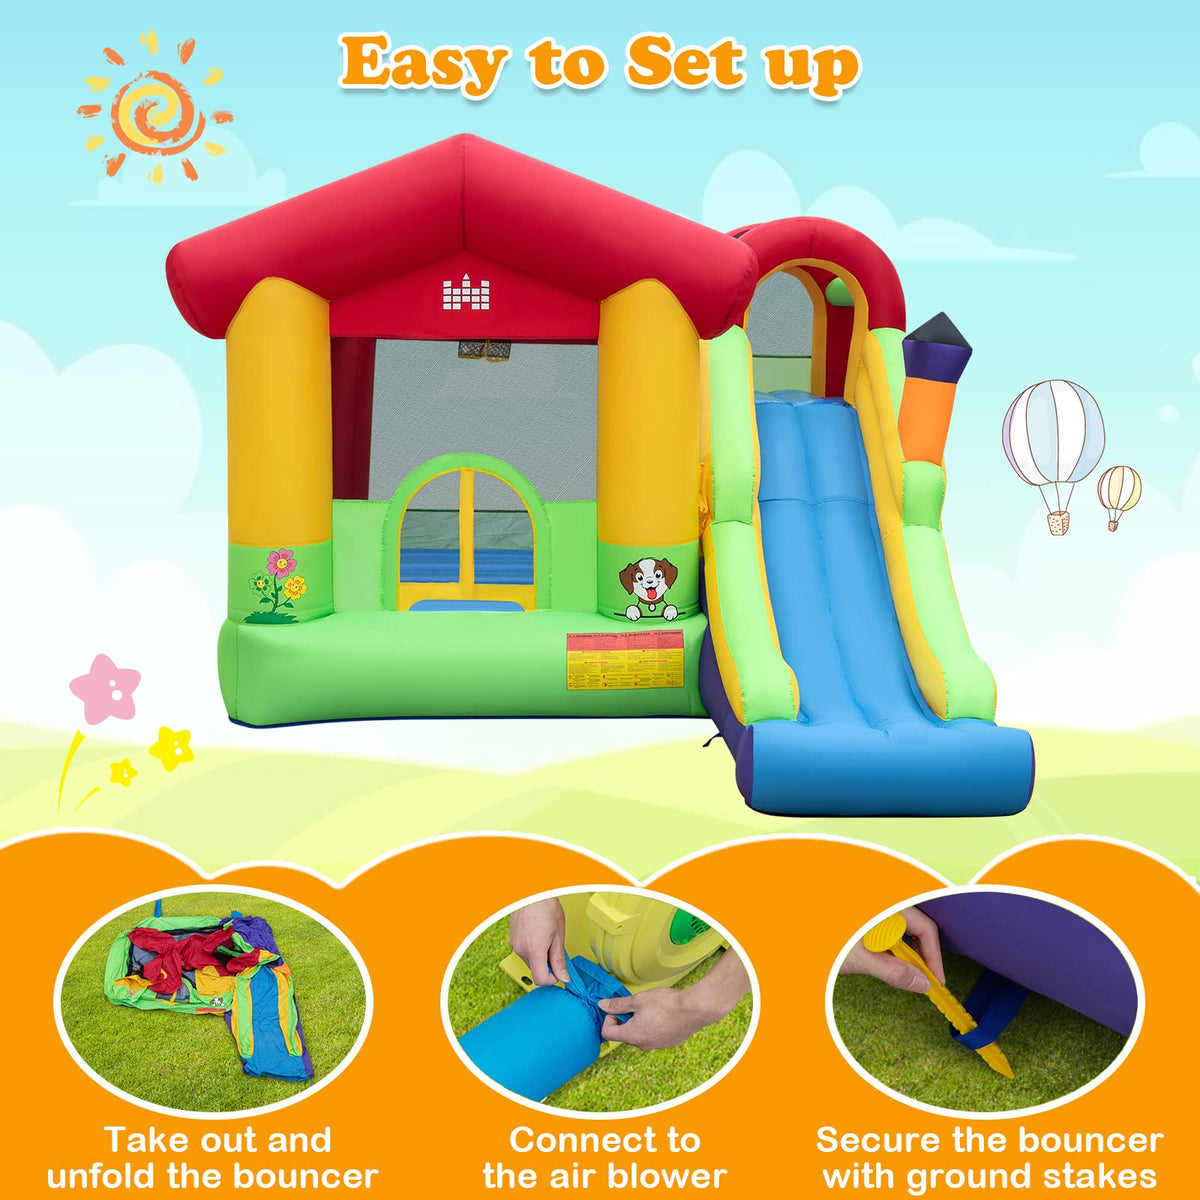 Inflatable Bounce House, Jumping Castle for Kids w/Climbing Wall, Slide with 680W Blower